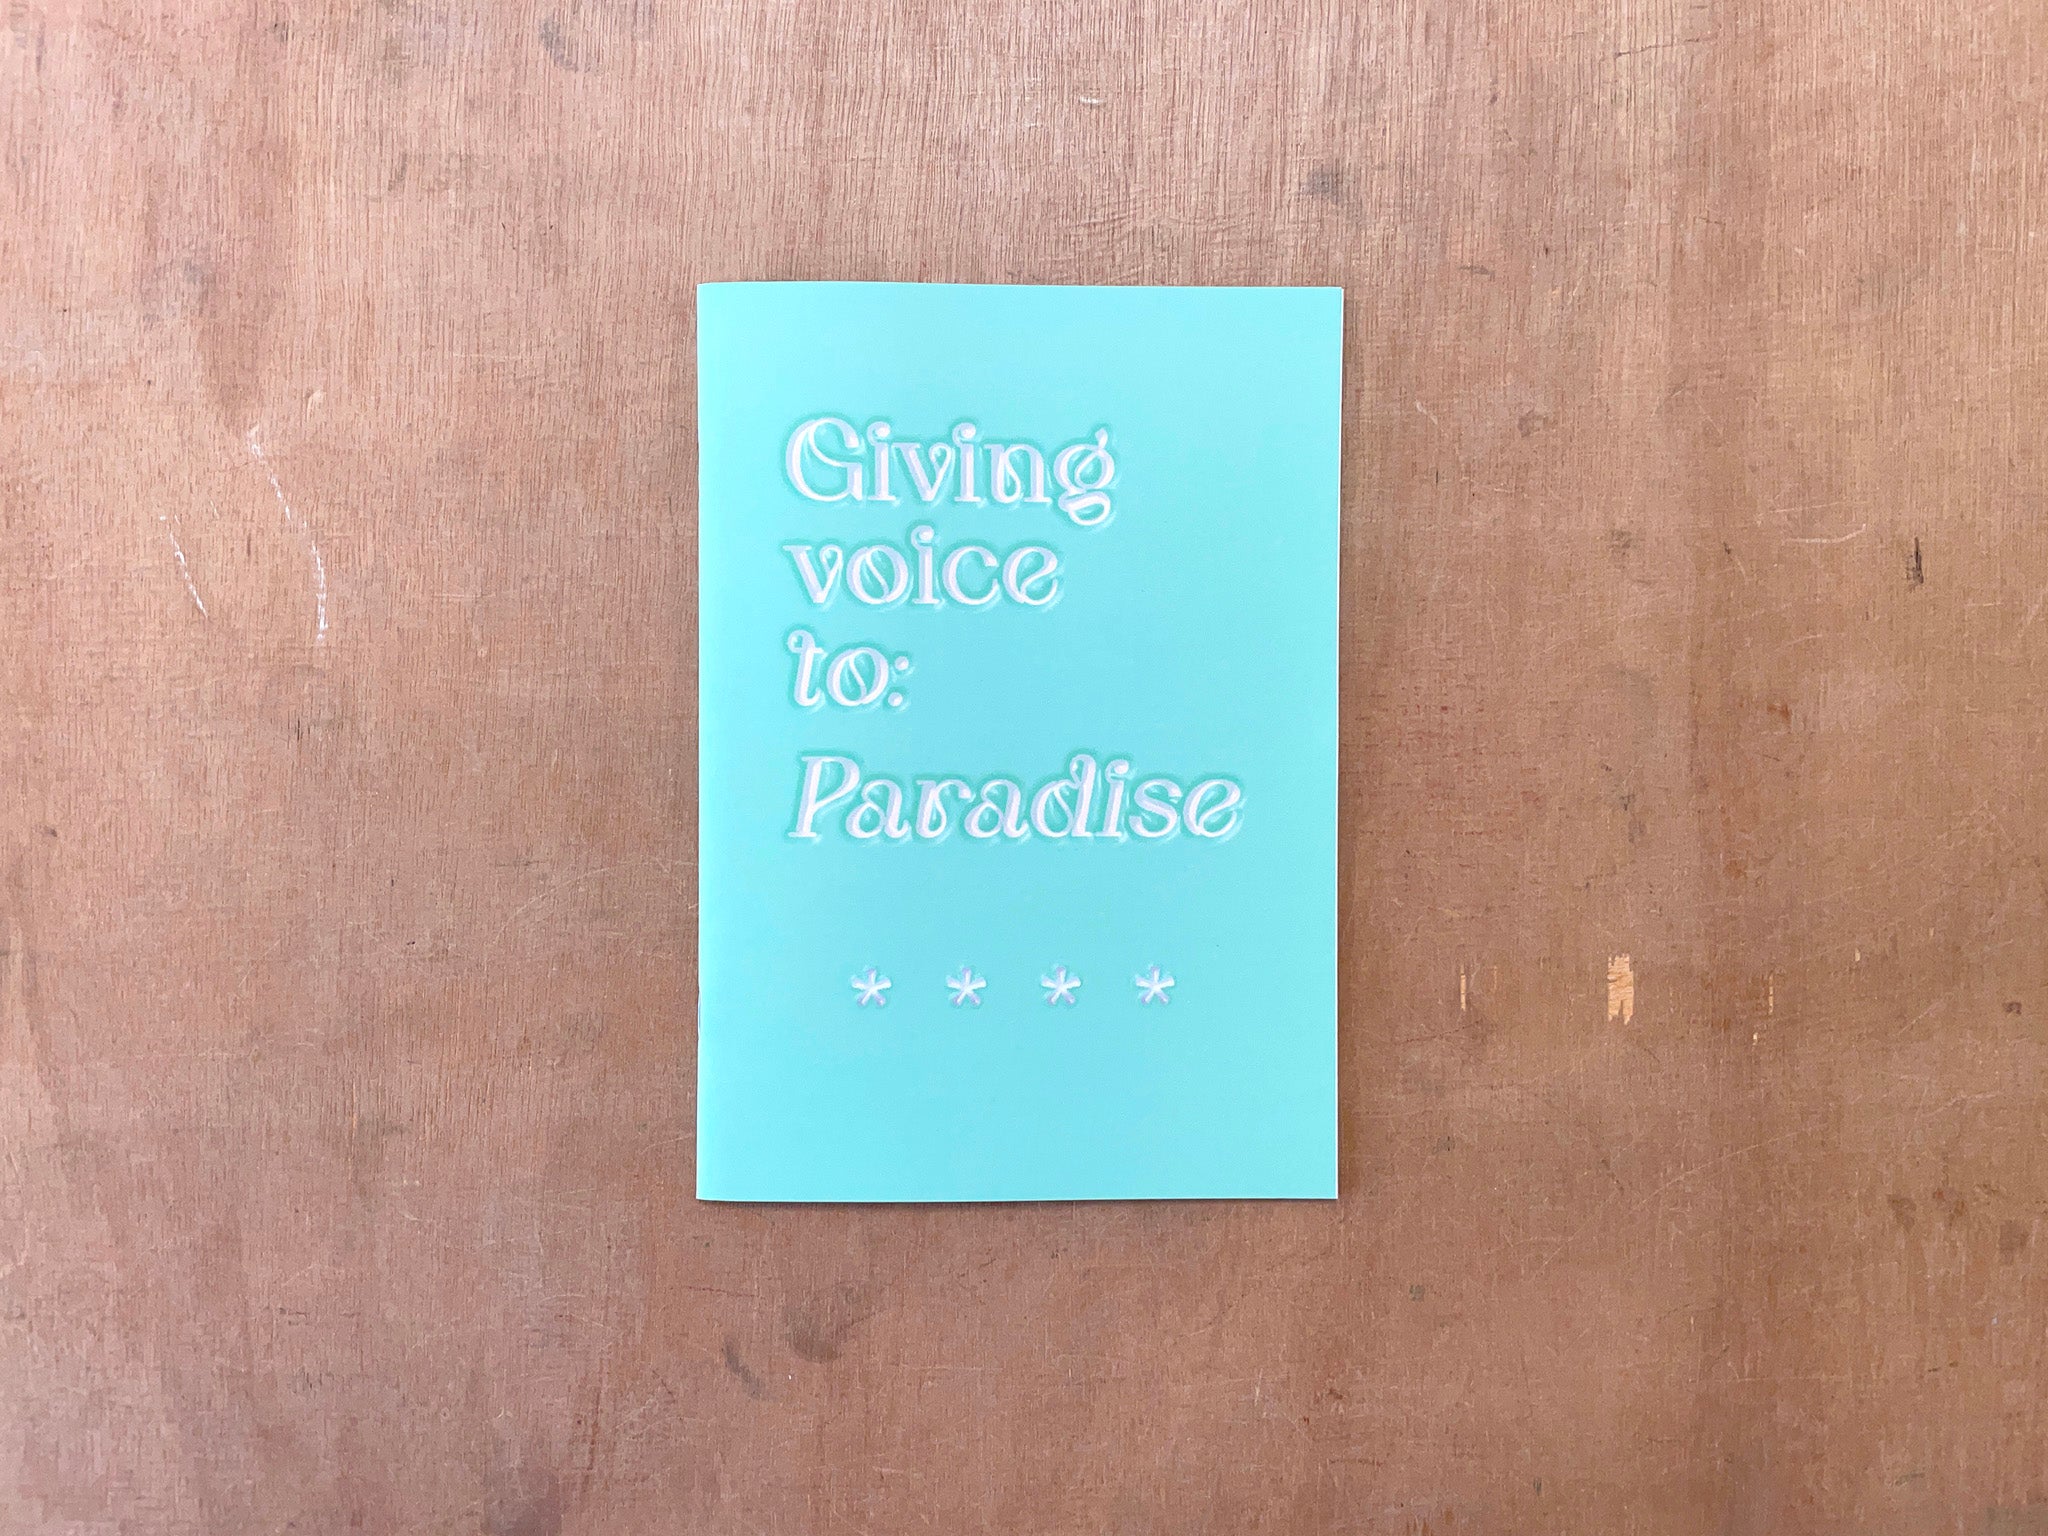 GIVING VOICE TO: PARADISE by Freya Yeates & MUCK